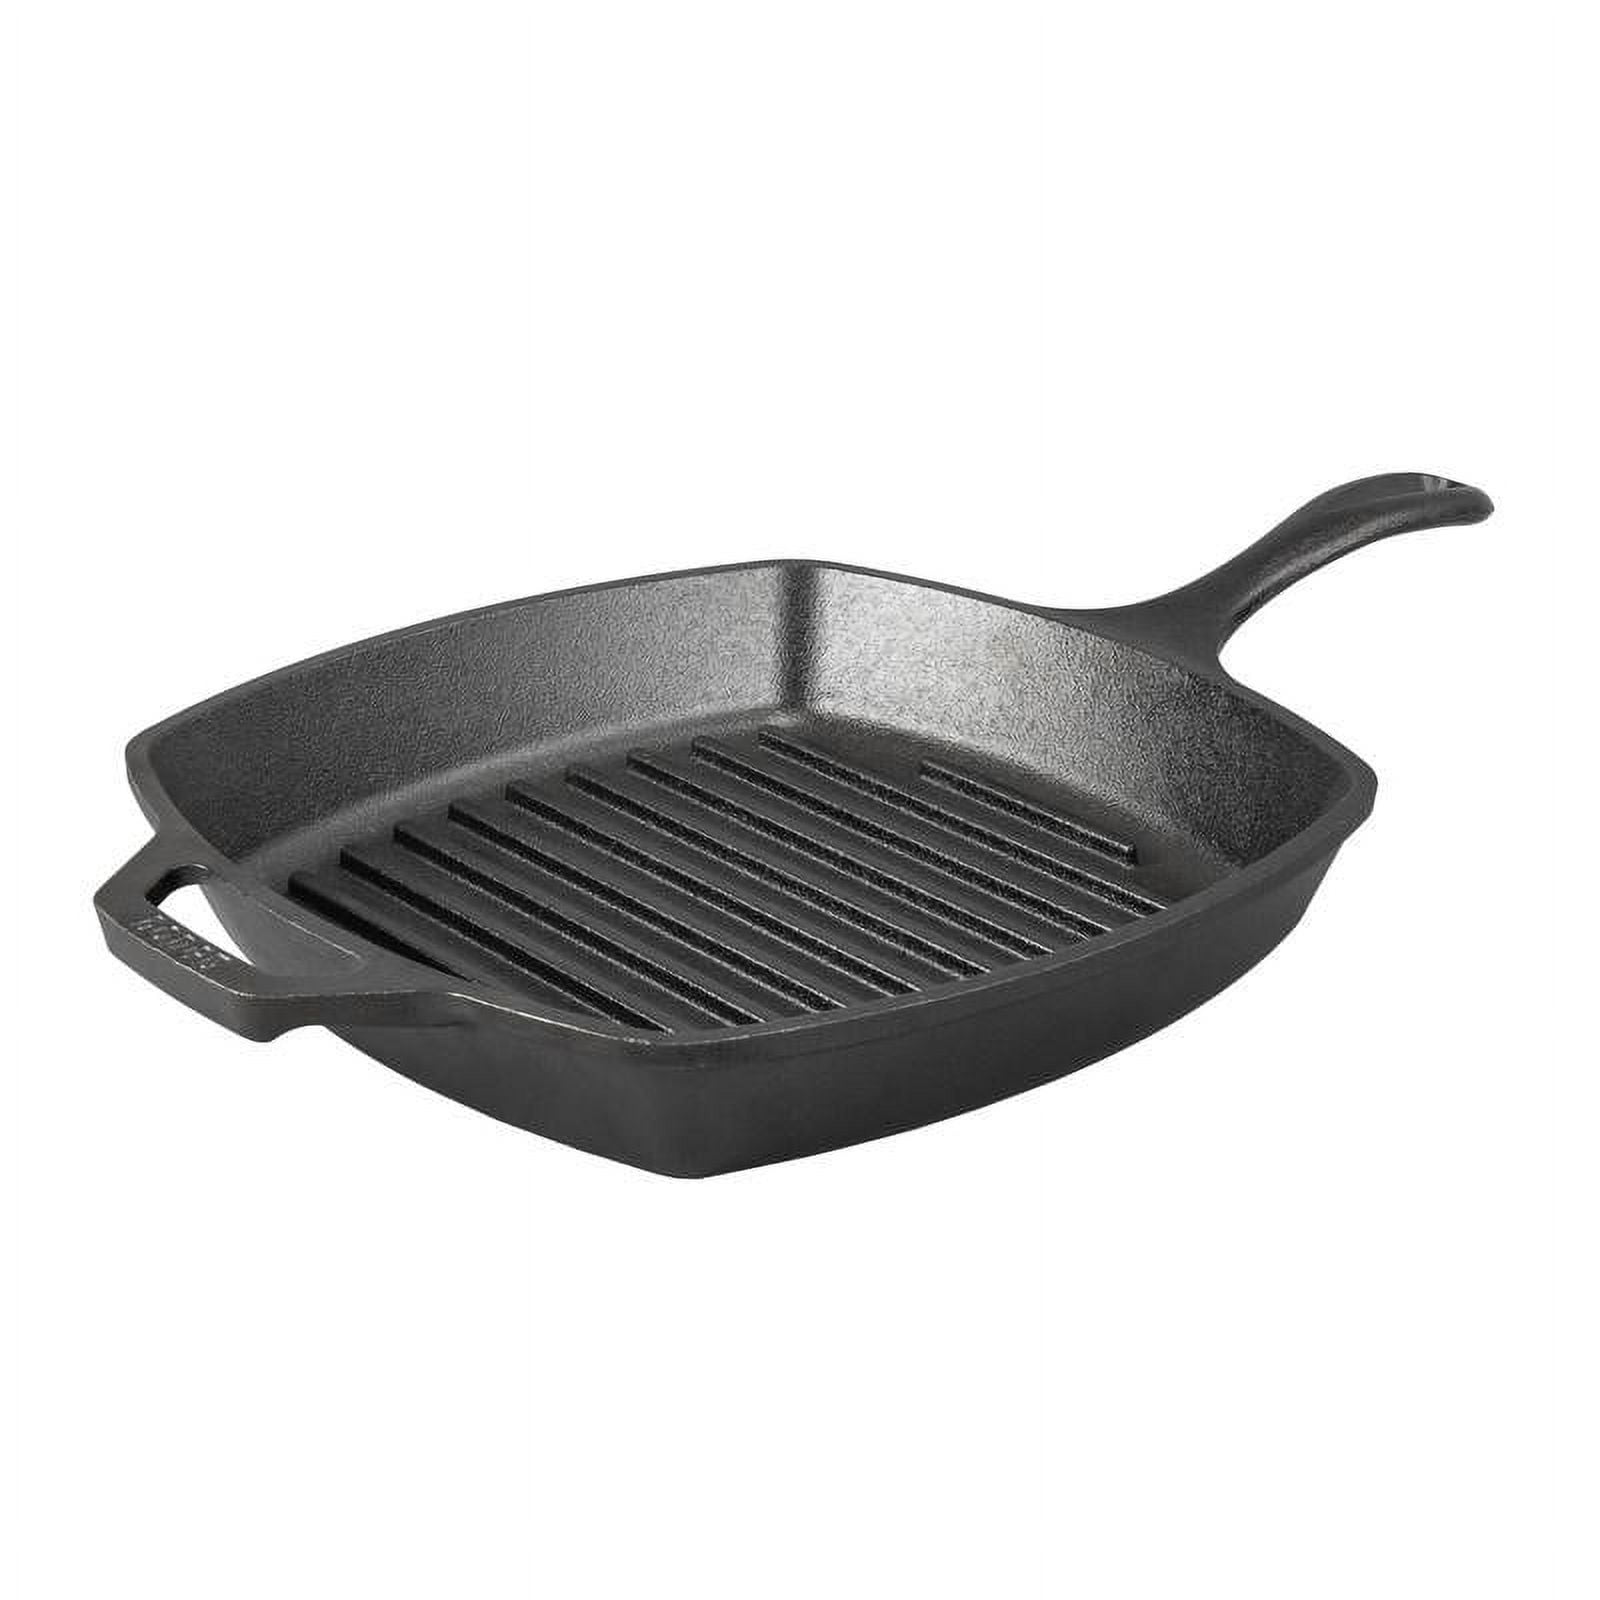 Lodge L10CF3 Cast Iron Covered Deep Skillet, Pre-Seasoned, 5-Quart & L14SK3  15-Inch Pre-Seasoned Cast-Iron Skillet